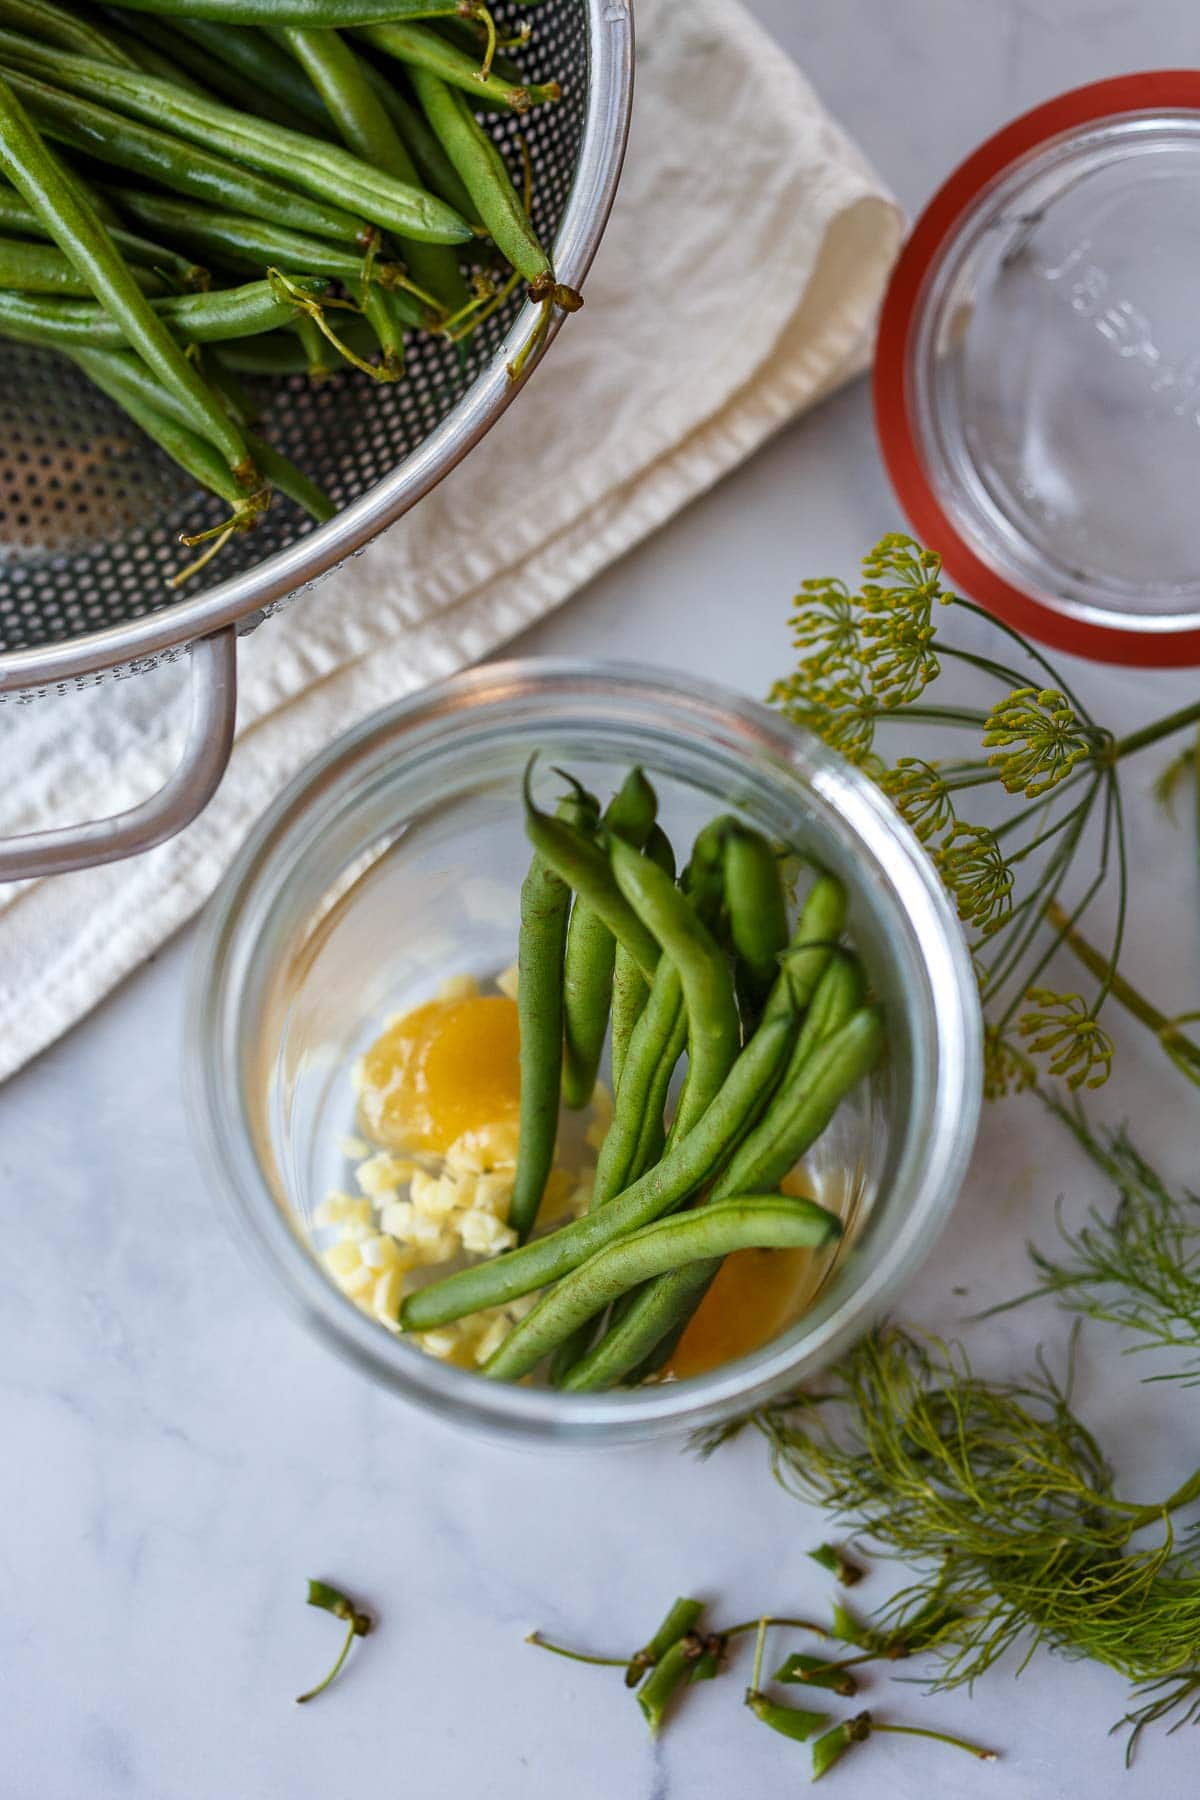 A jar with green beans. In the making of Dilly Beans.